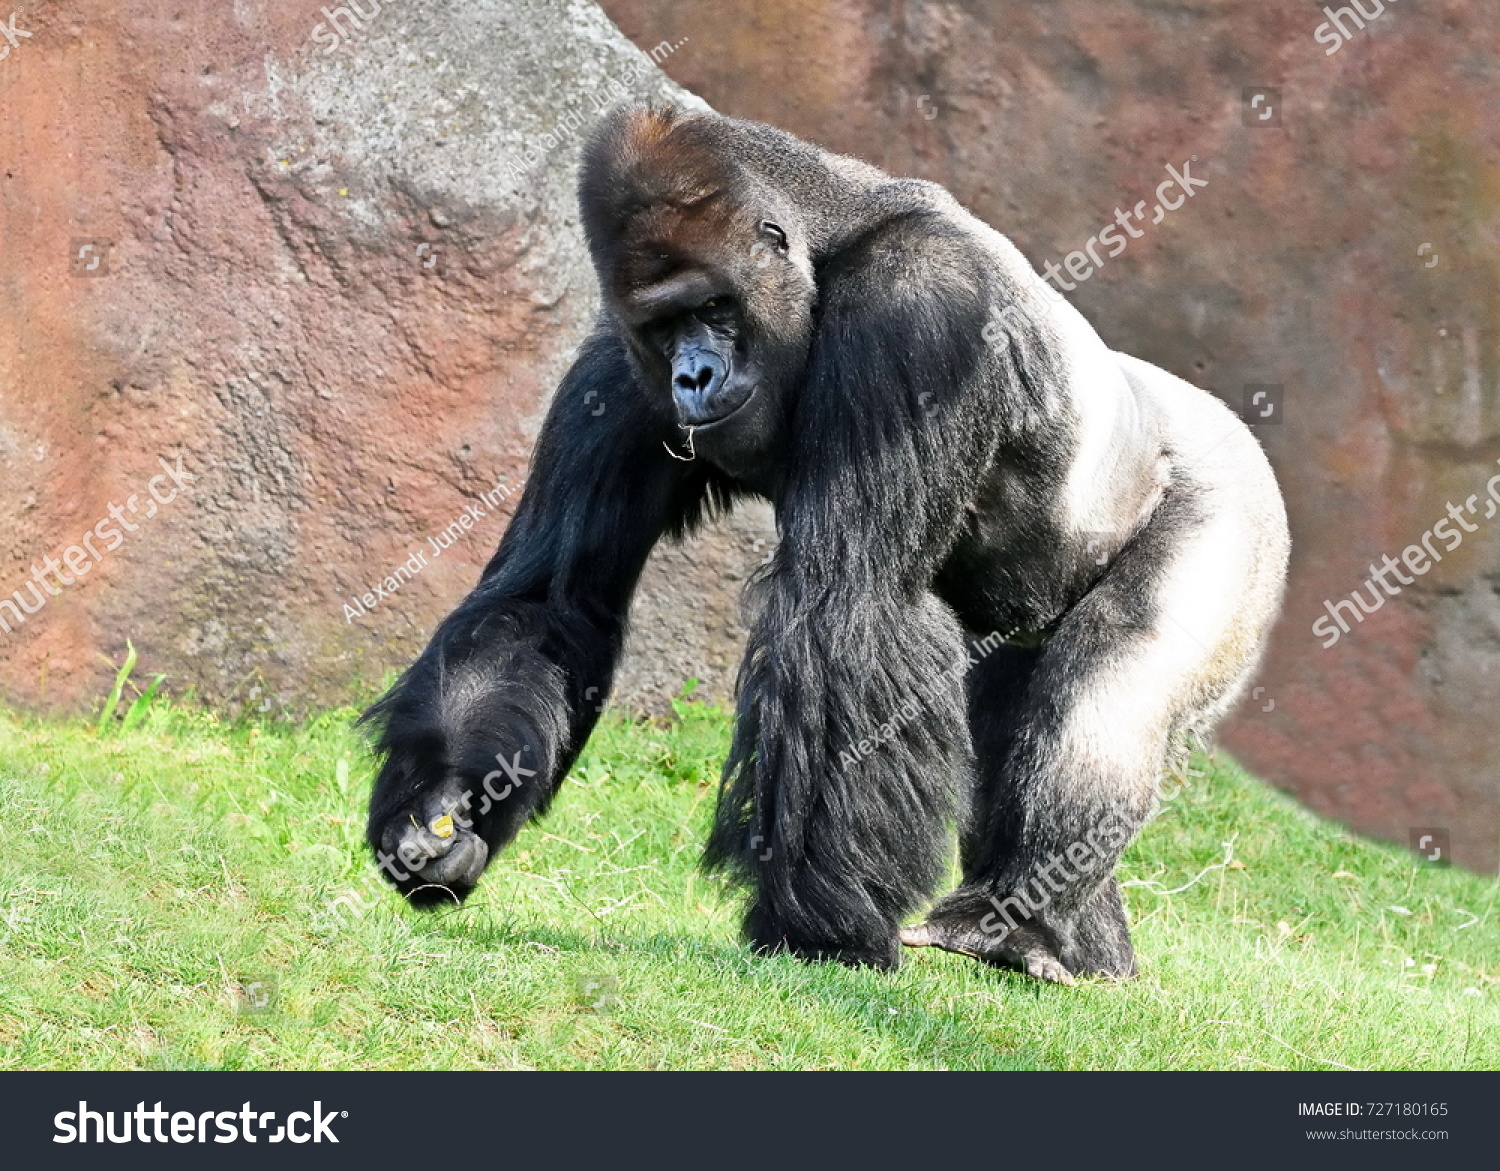 Western lowland gorilla (Gorilla gorilla gorilla) having a snack #727180165